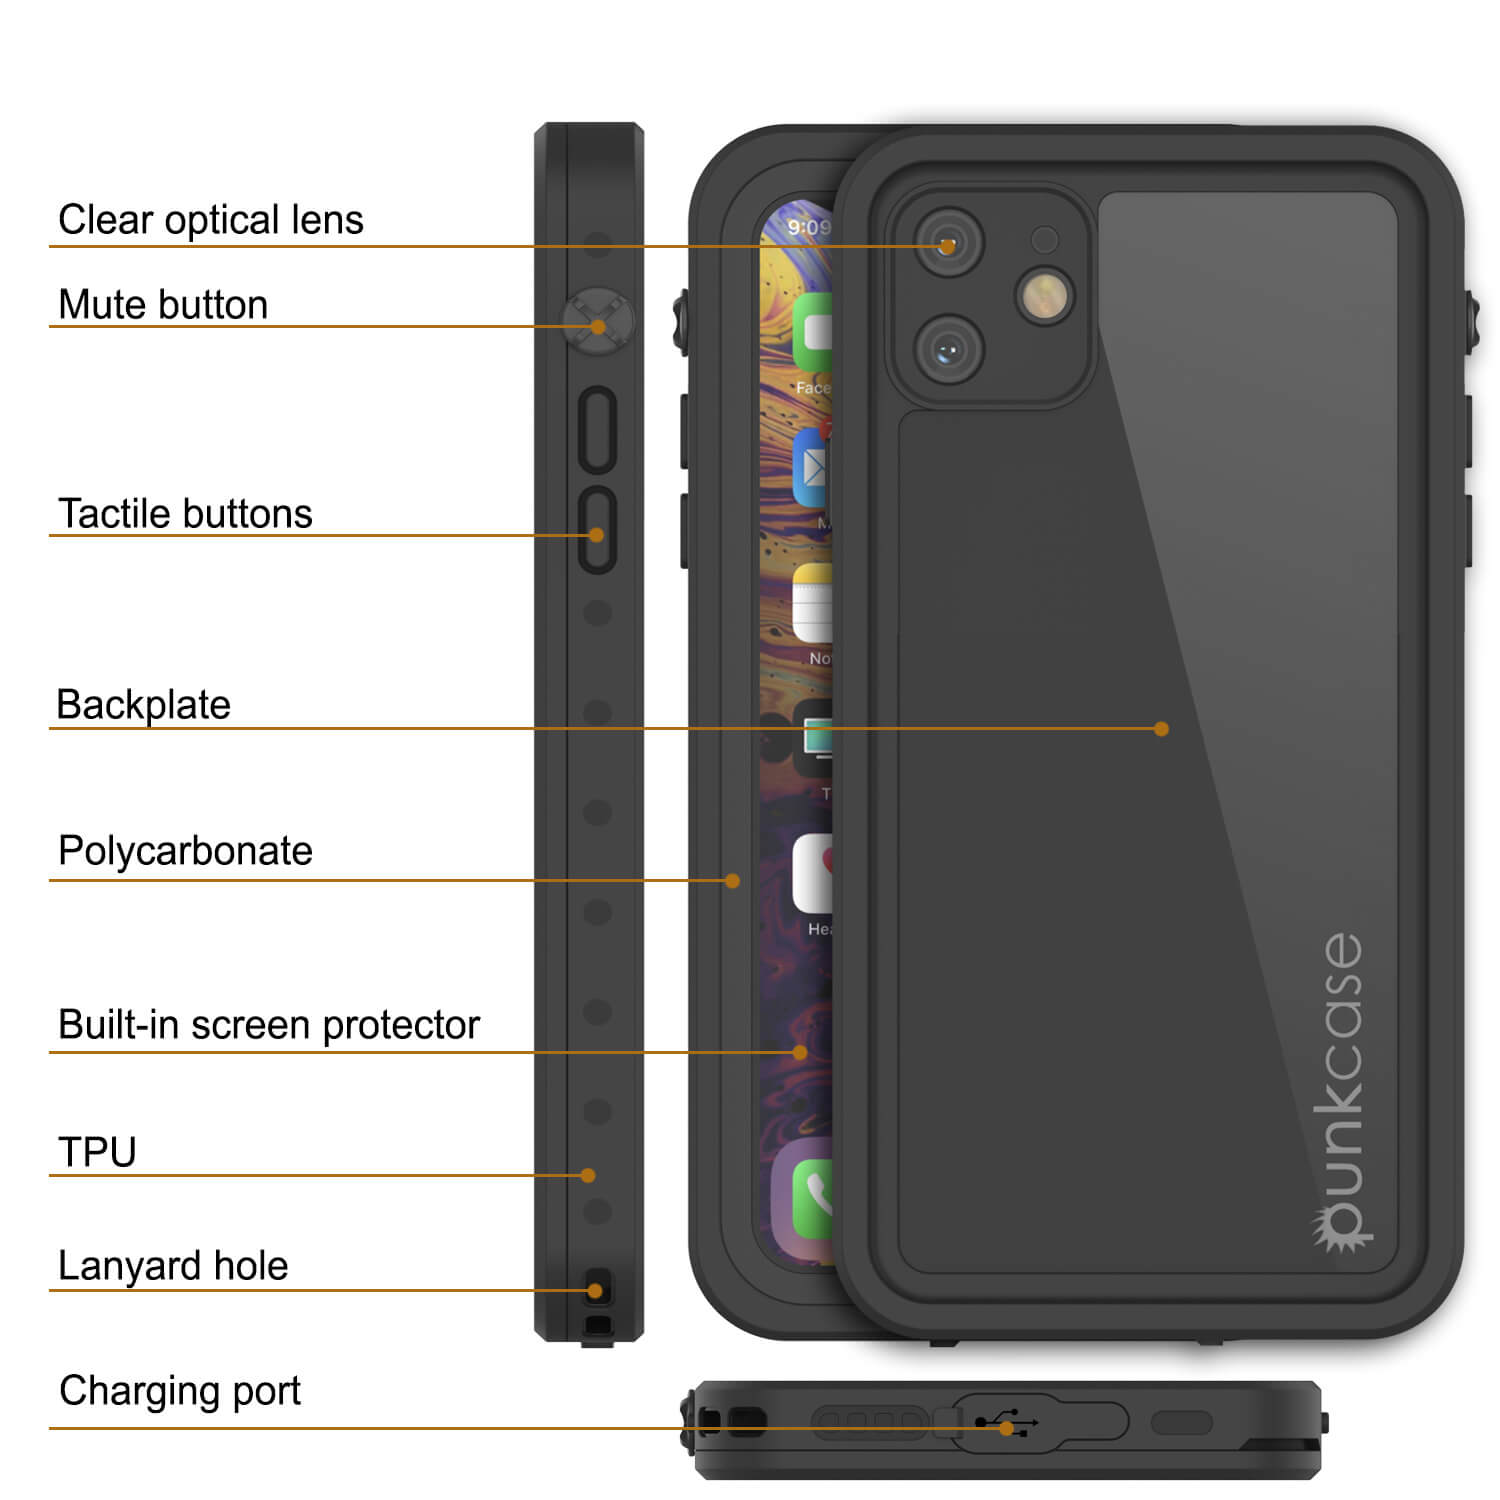 Will an iPhone 11 Case Fit an iPhone 11 Pro? – DIPSODA